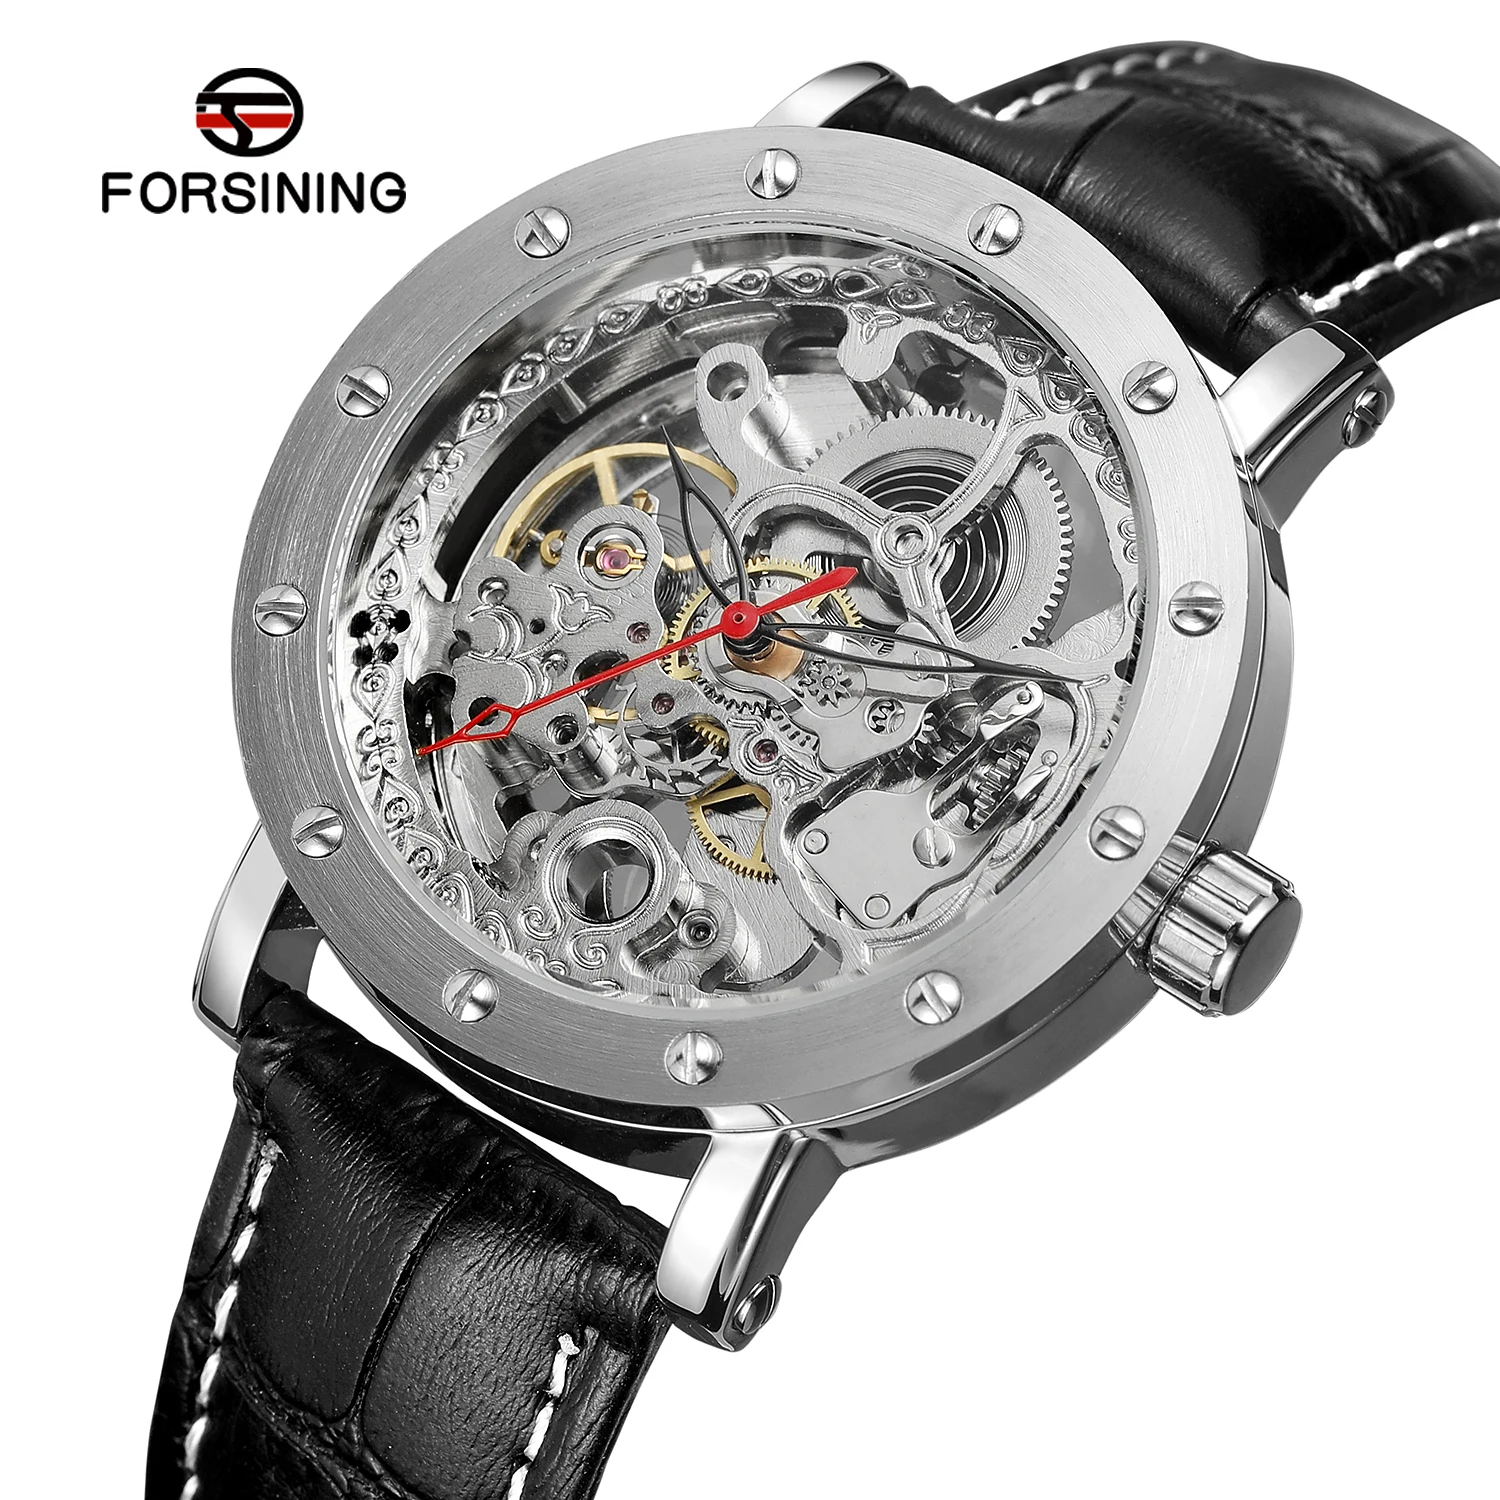 

High Quality FORSINING mens watches Top Brand Luxury Hollow Skeleton Mechanical Automatic wristwatch reloj hombre automatico